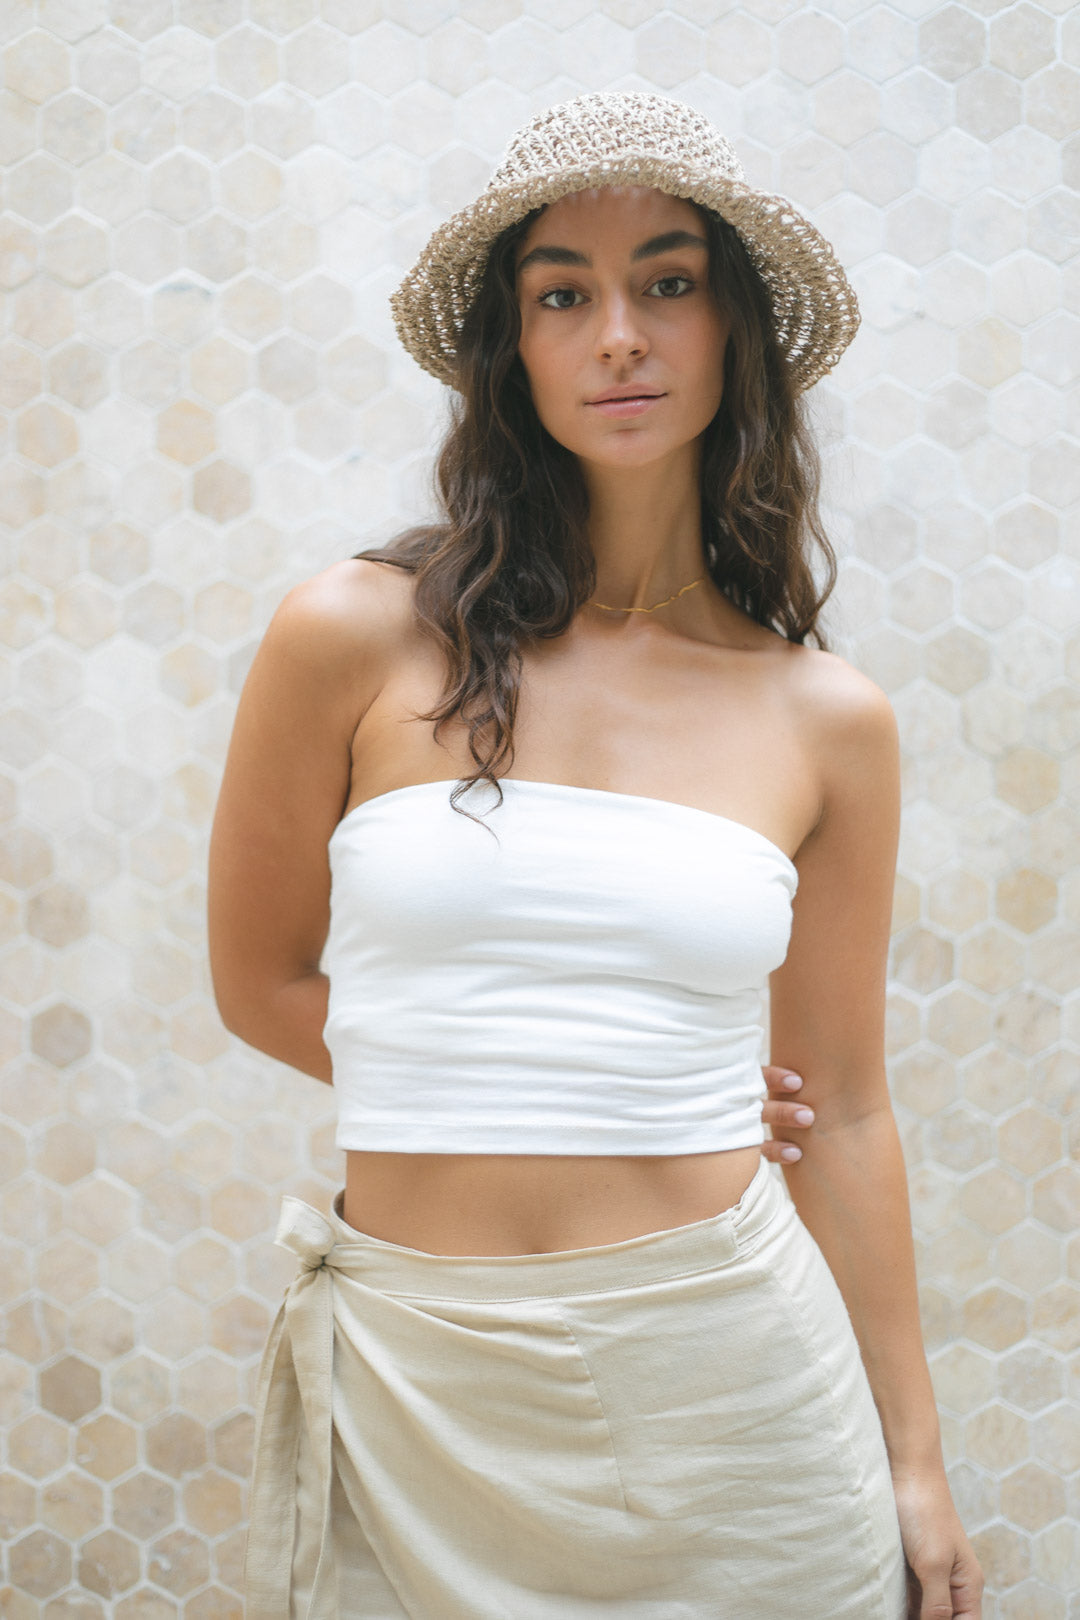 Woven Eco Straw Hat